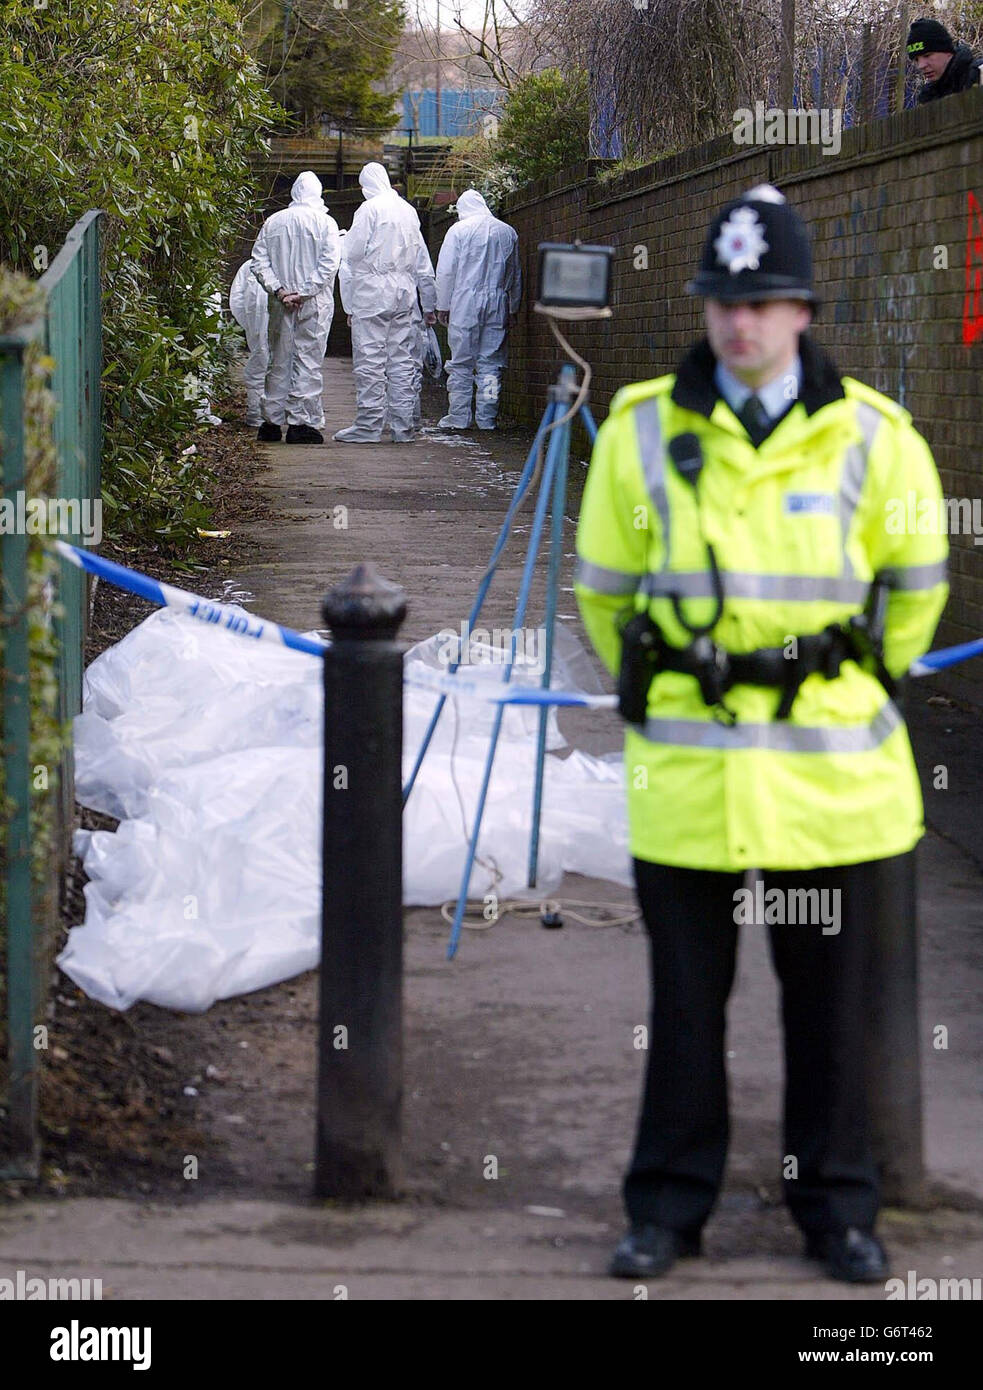 Police forensic officers search an alley on Stratford Road, Chorley, Lancashire after the body of Melanie Horridge was found there on Friday night. Two men were arrested today on suspicion of the murder of Melanie, Lancashire Police said. Stock Photo